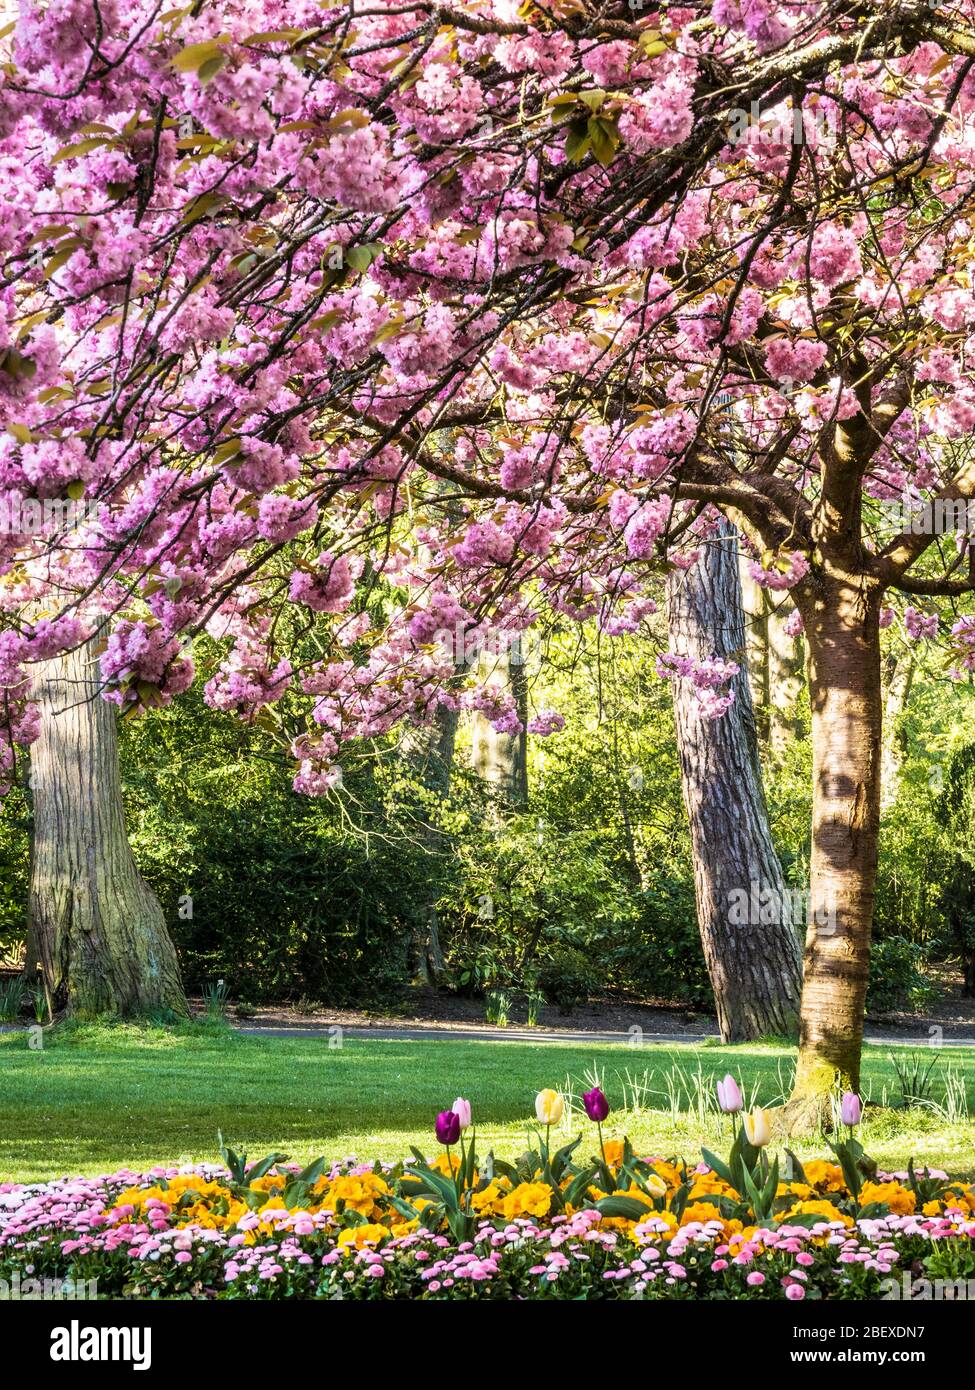 A flower bed and flowering pink cherry trees  in an urban public park in England. Stock Photo